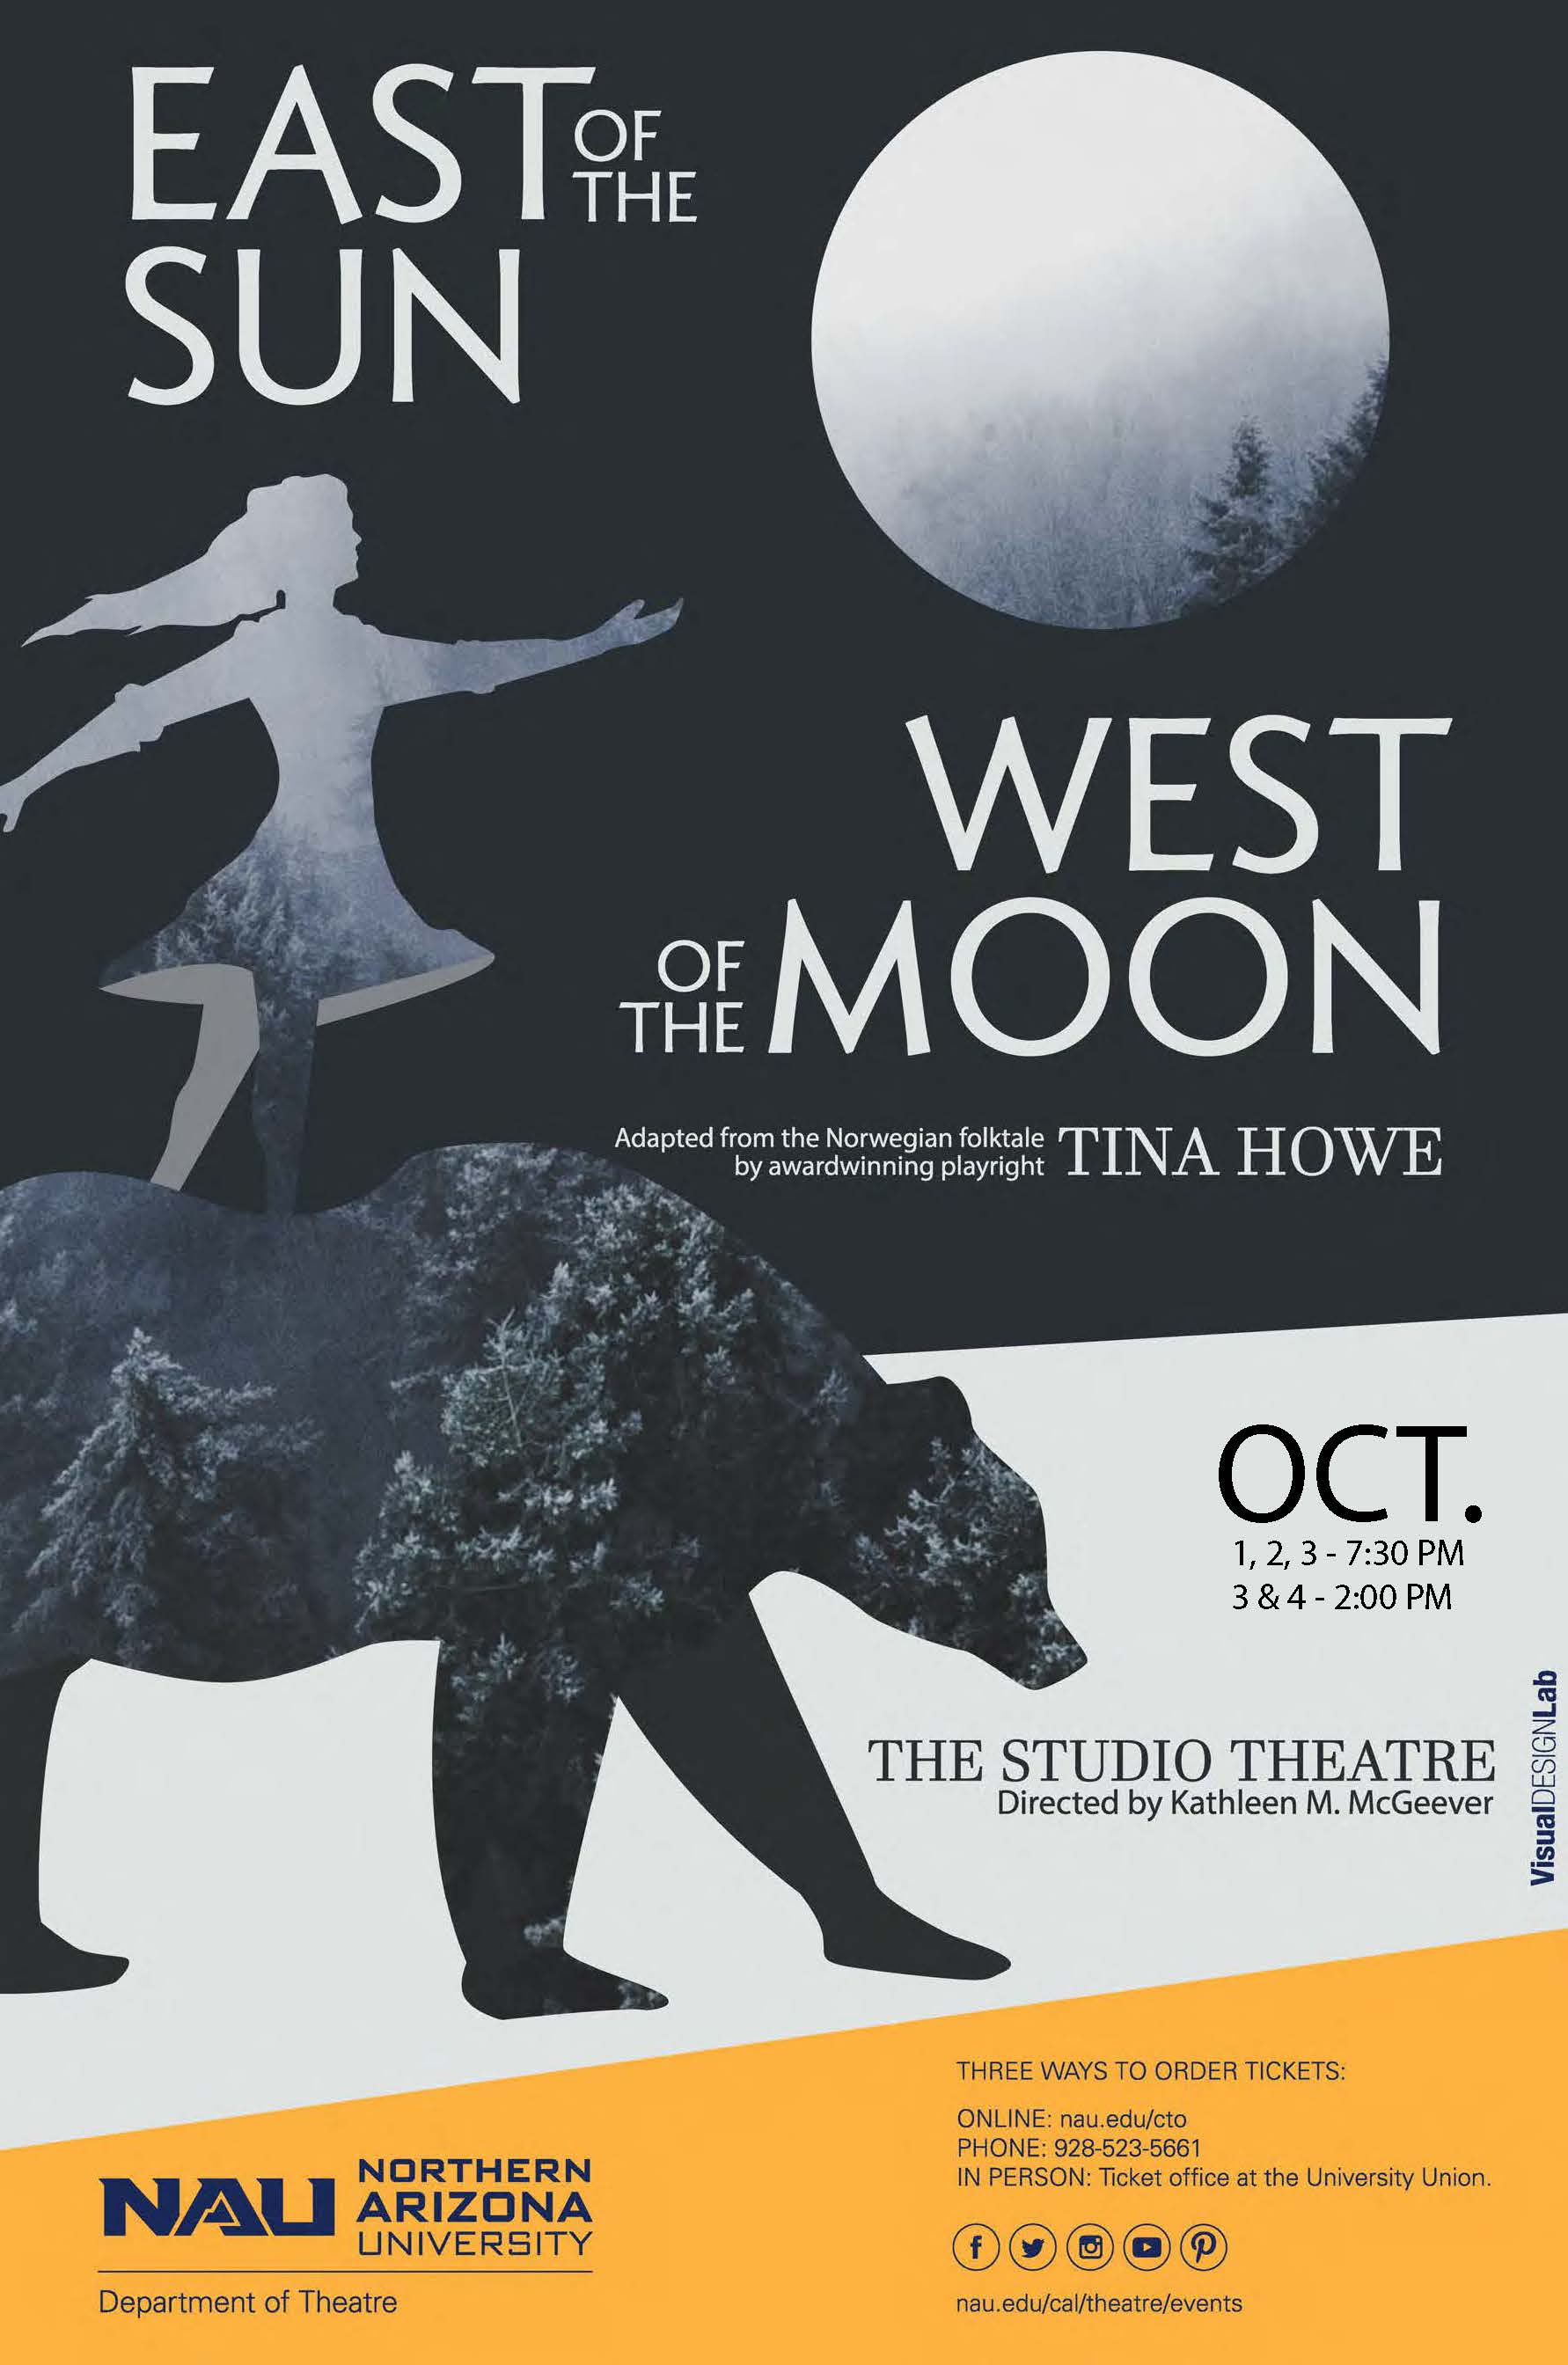 East of the Sun, West of the Moon flier